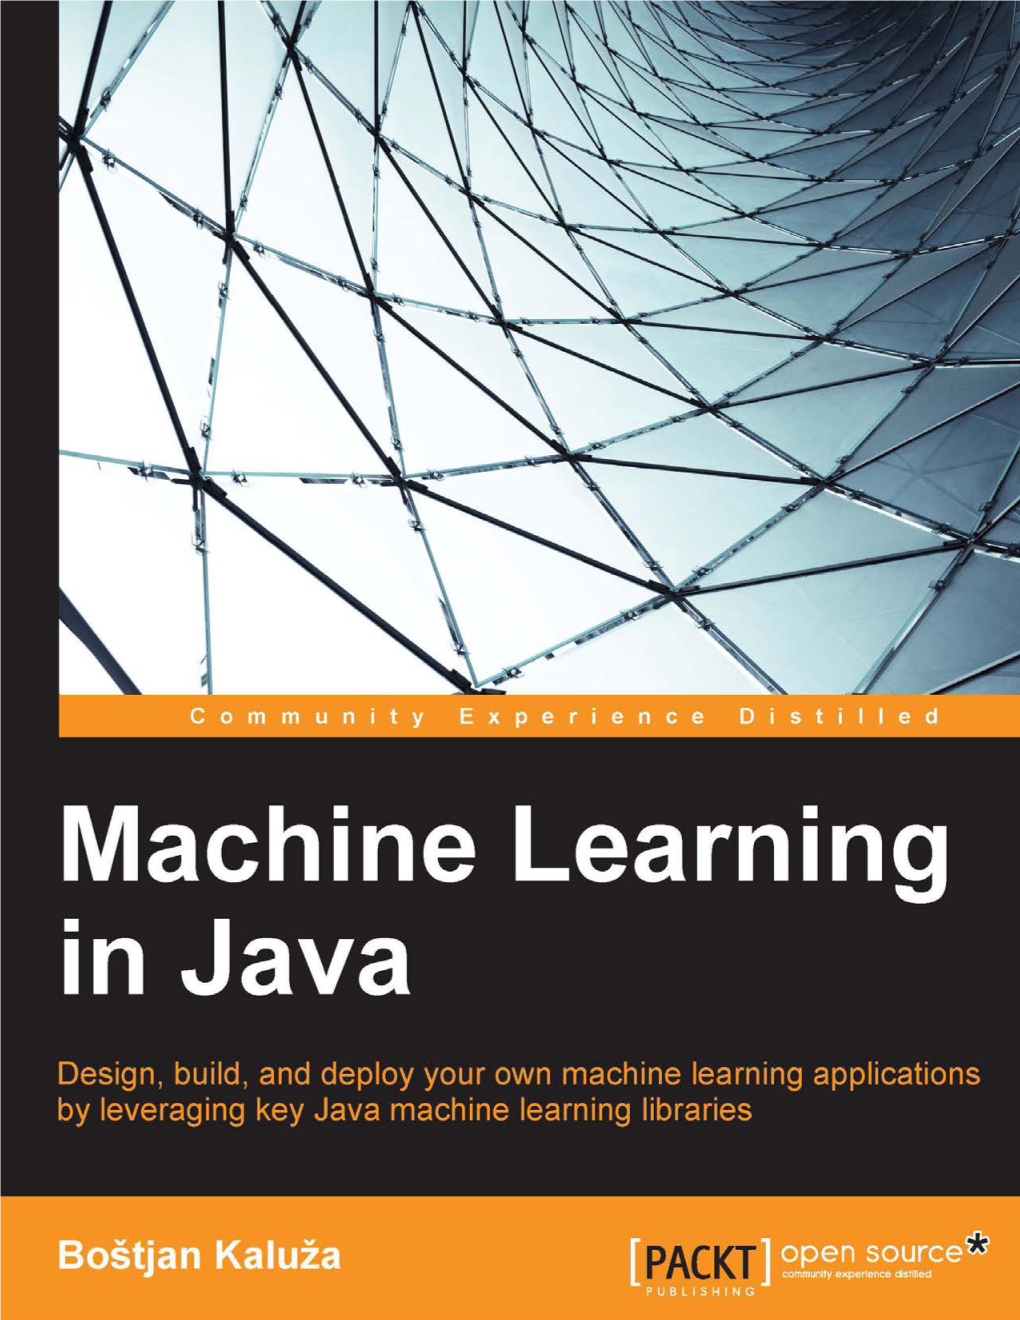 Java Machine Learning Libraries